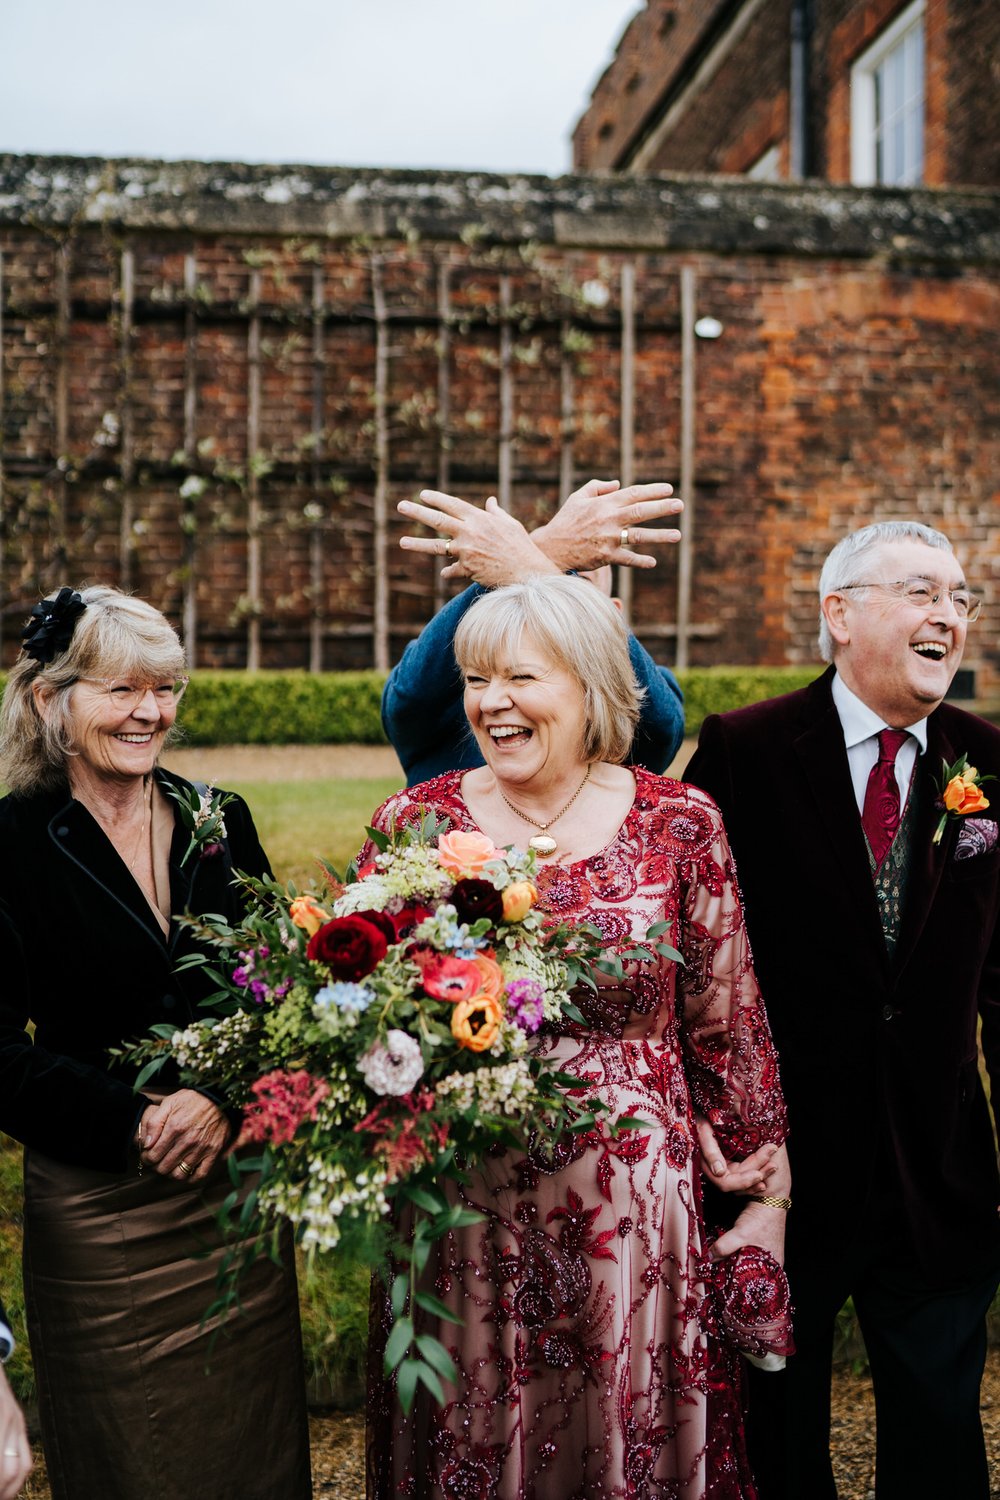 Bride, flanked by groom and sister, stands and holds her beautiful bouquet as someone makes a silly hand sign on top of her head